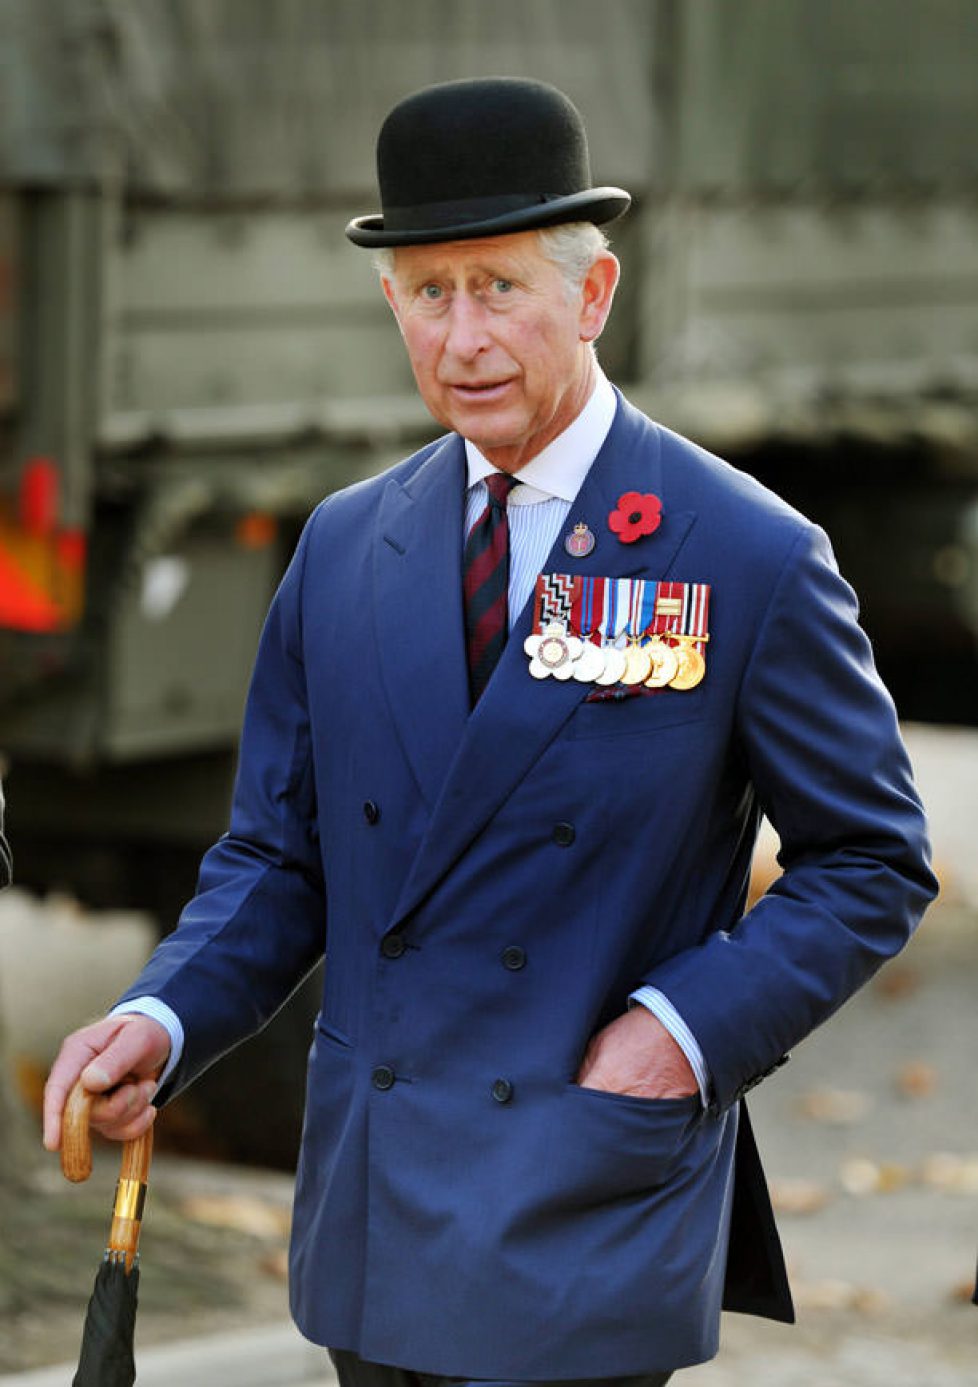 Prince-Charles-is-dignified-in-his-bowler-hat